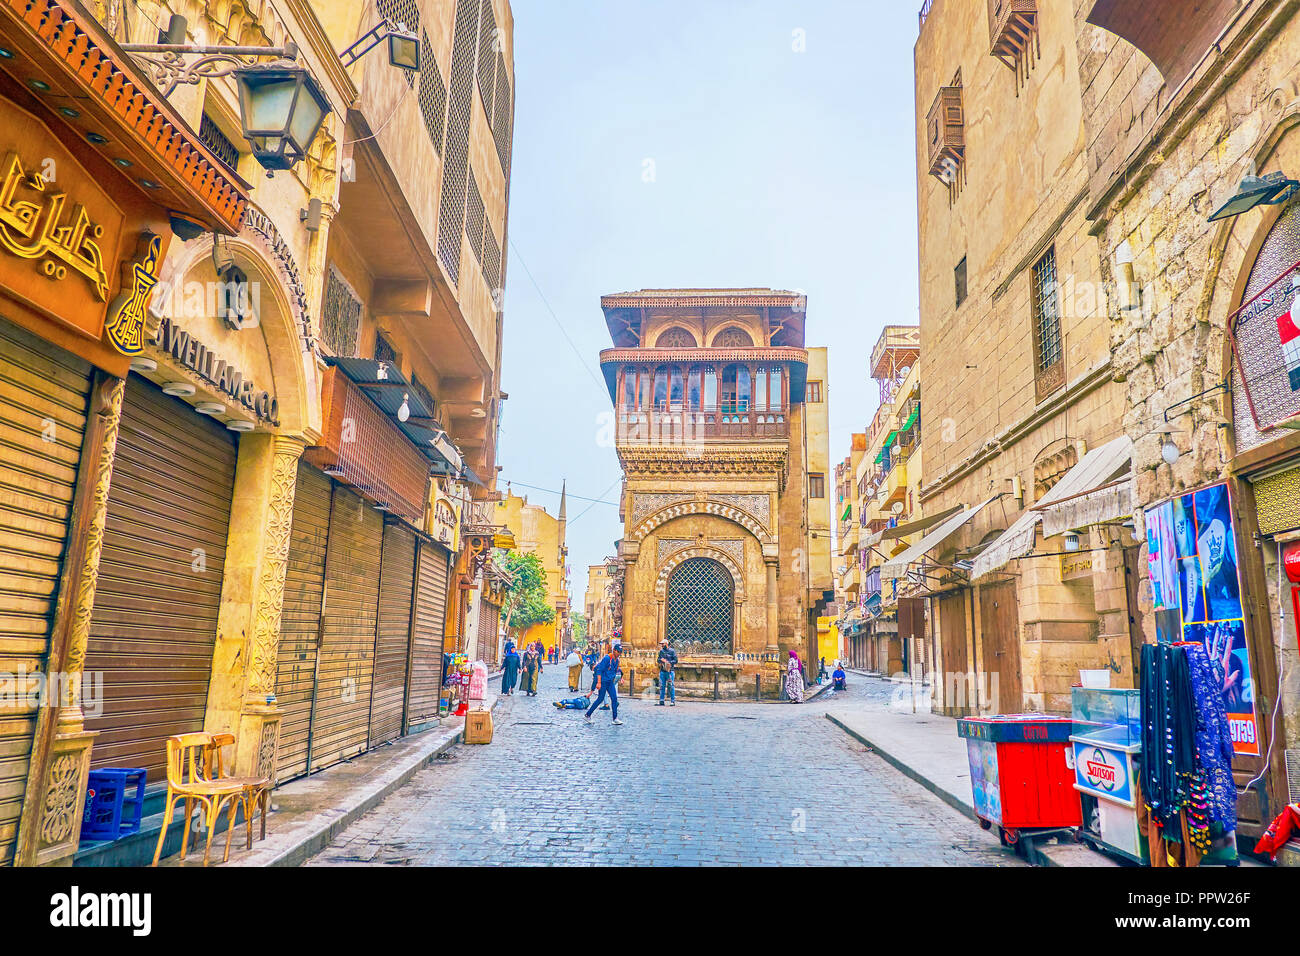 CAIRO, EGYPT - DECEMBER 23, 2017: The beautiful medieval Sabil-Kuttab of Katkhuda building faces the Al-Muizz Street, on December 23 in Cairo Stock Photo